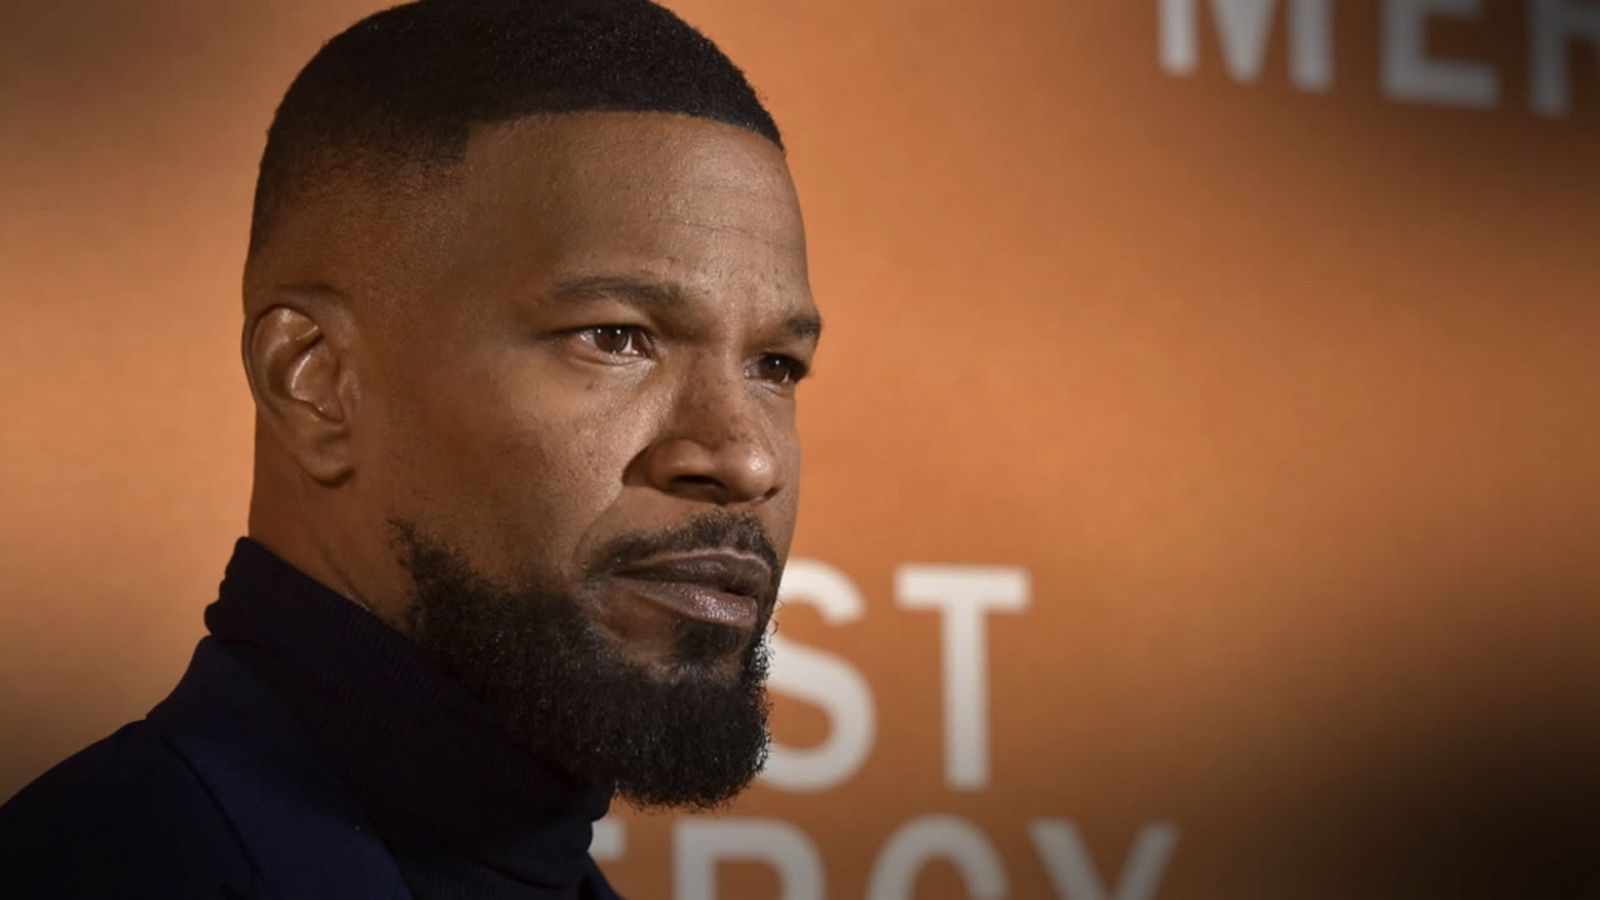 Jamie Foxx on his way to recovery after undisclosed illness: Source - Good Morning America